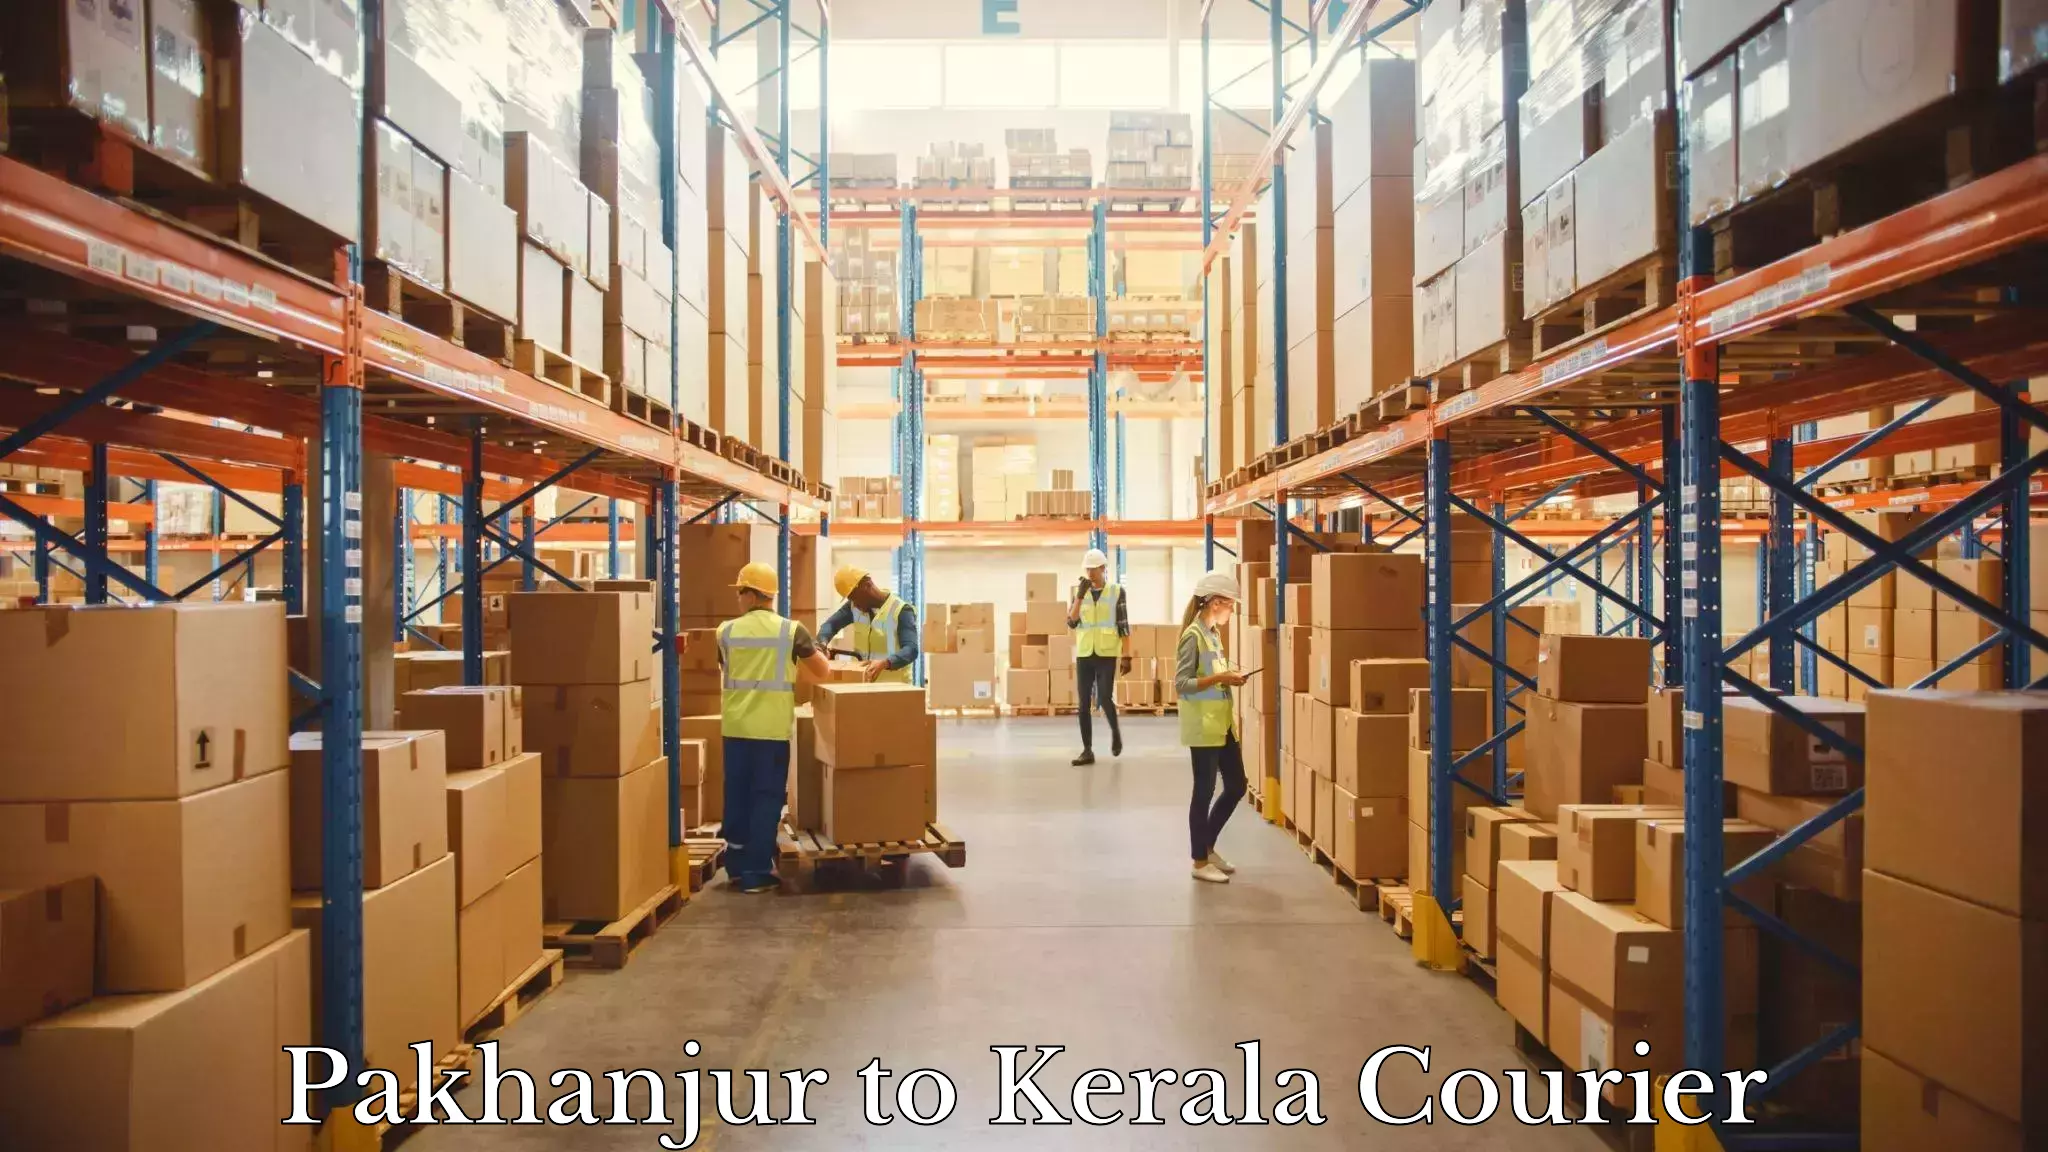 Pharmaceutical courier Pakhanjur to Cochin University of Science and Technology